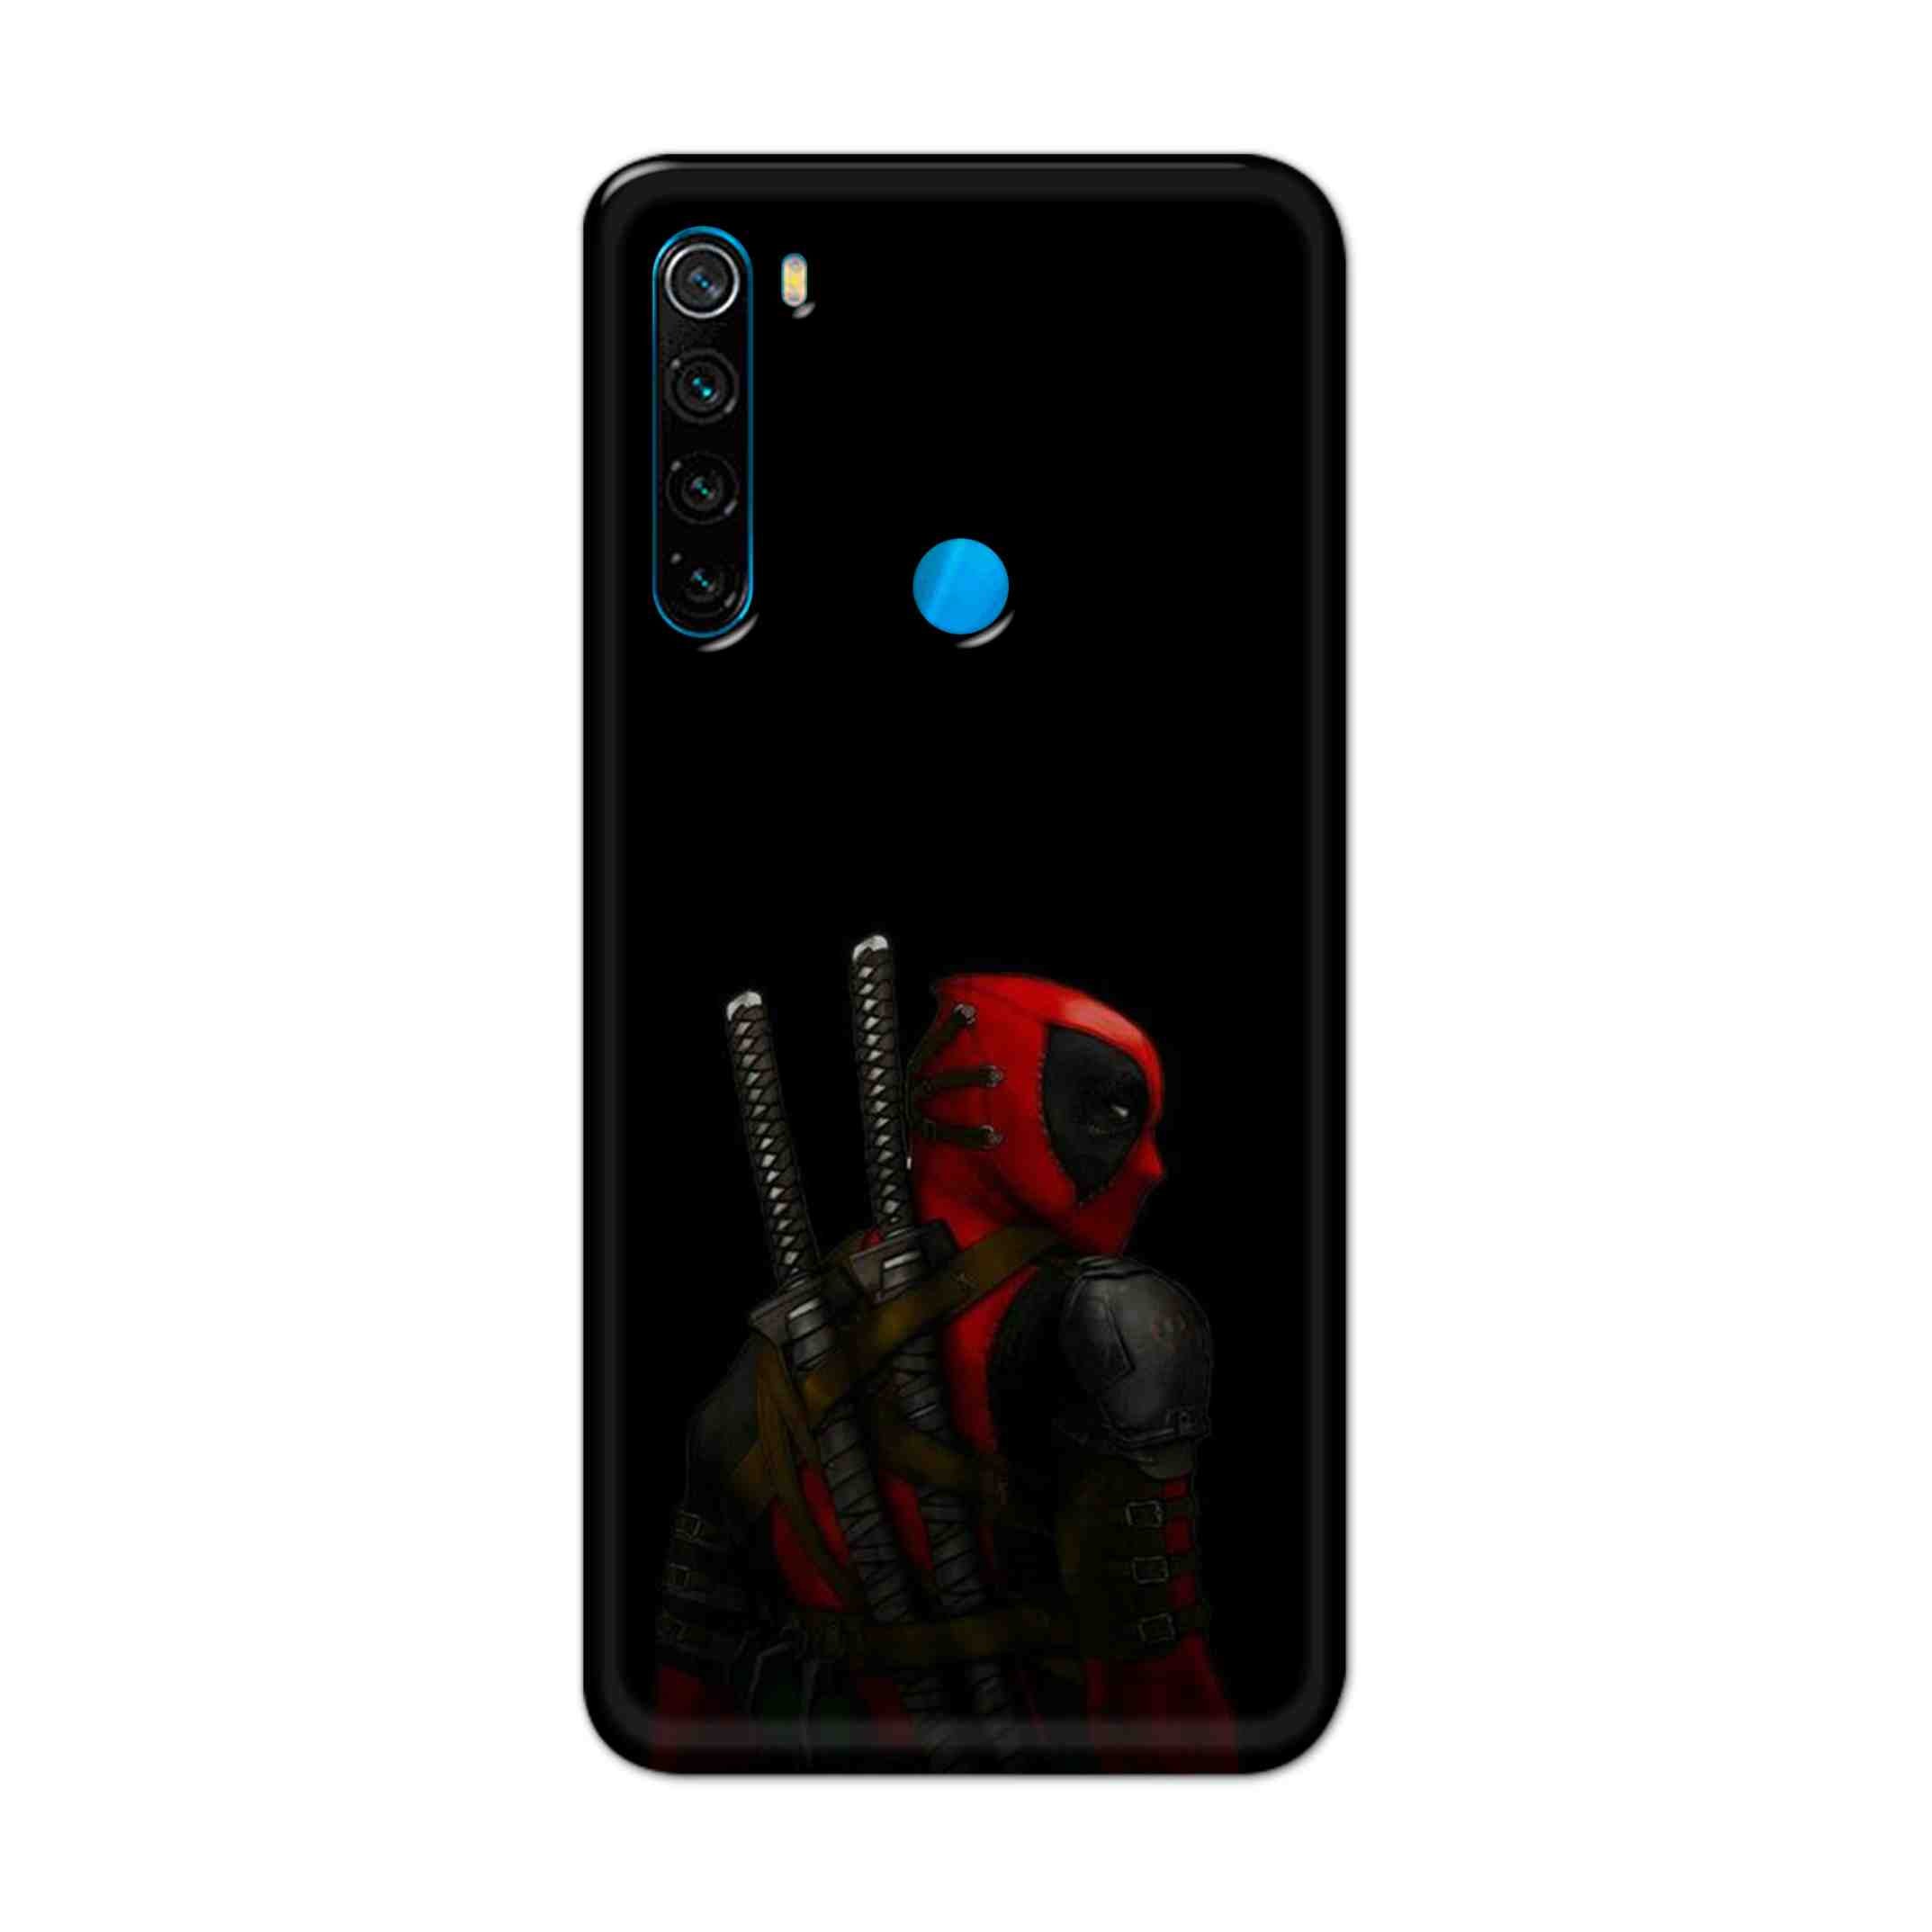 Buy Deadpool Hard Back Mobile Phone Case Cover For Xiaomi Redmi Note 8 Online